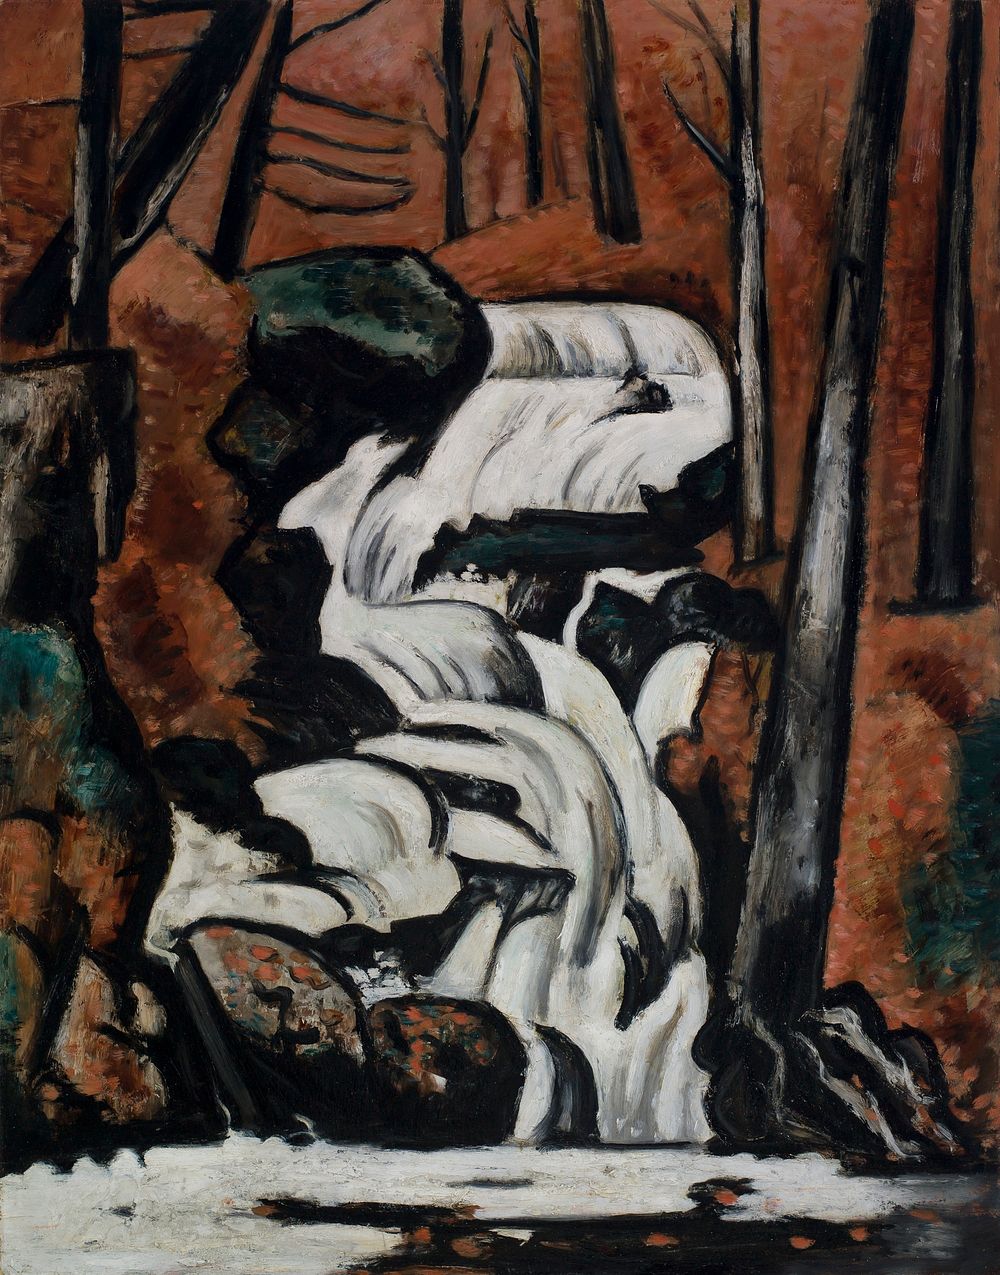 Smelt Brook Falls (1937) painting in high resolution by Marsden Hartley. Original from the Saint Louis Art Museum. 